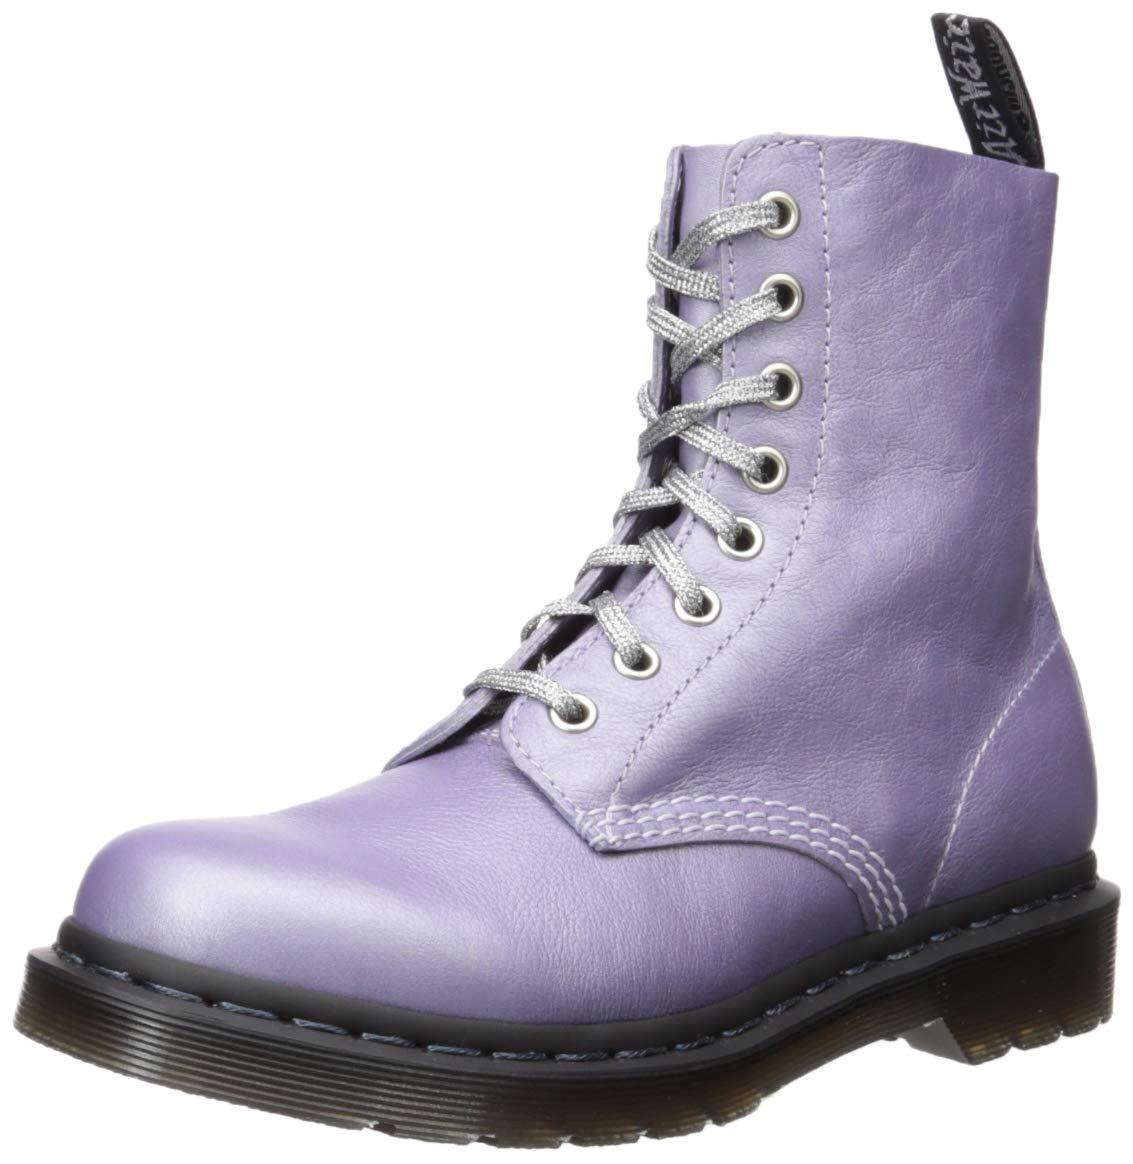 Dr. Martens 1460 Metallic Leather Boot in Lavender (Purple) | Lyst